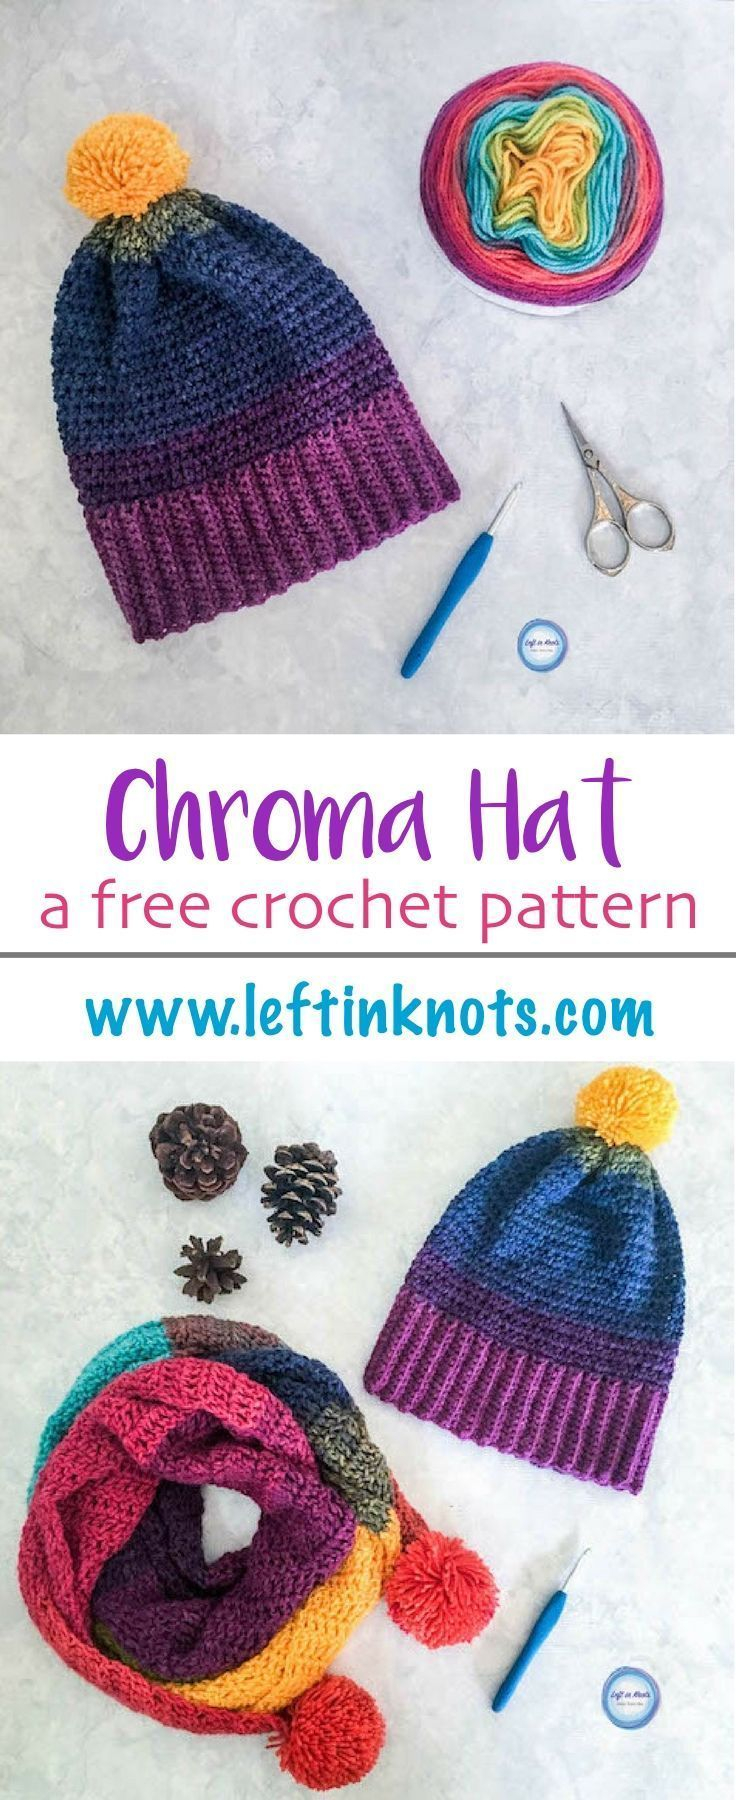 Lionbrand Com Free Crochet Patterns The Chroma Hat Is A Simple Slouch Hat That Works Up Quickly Using